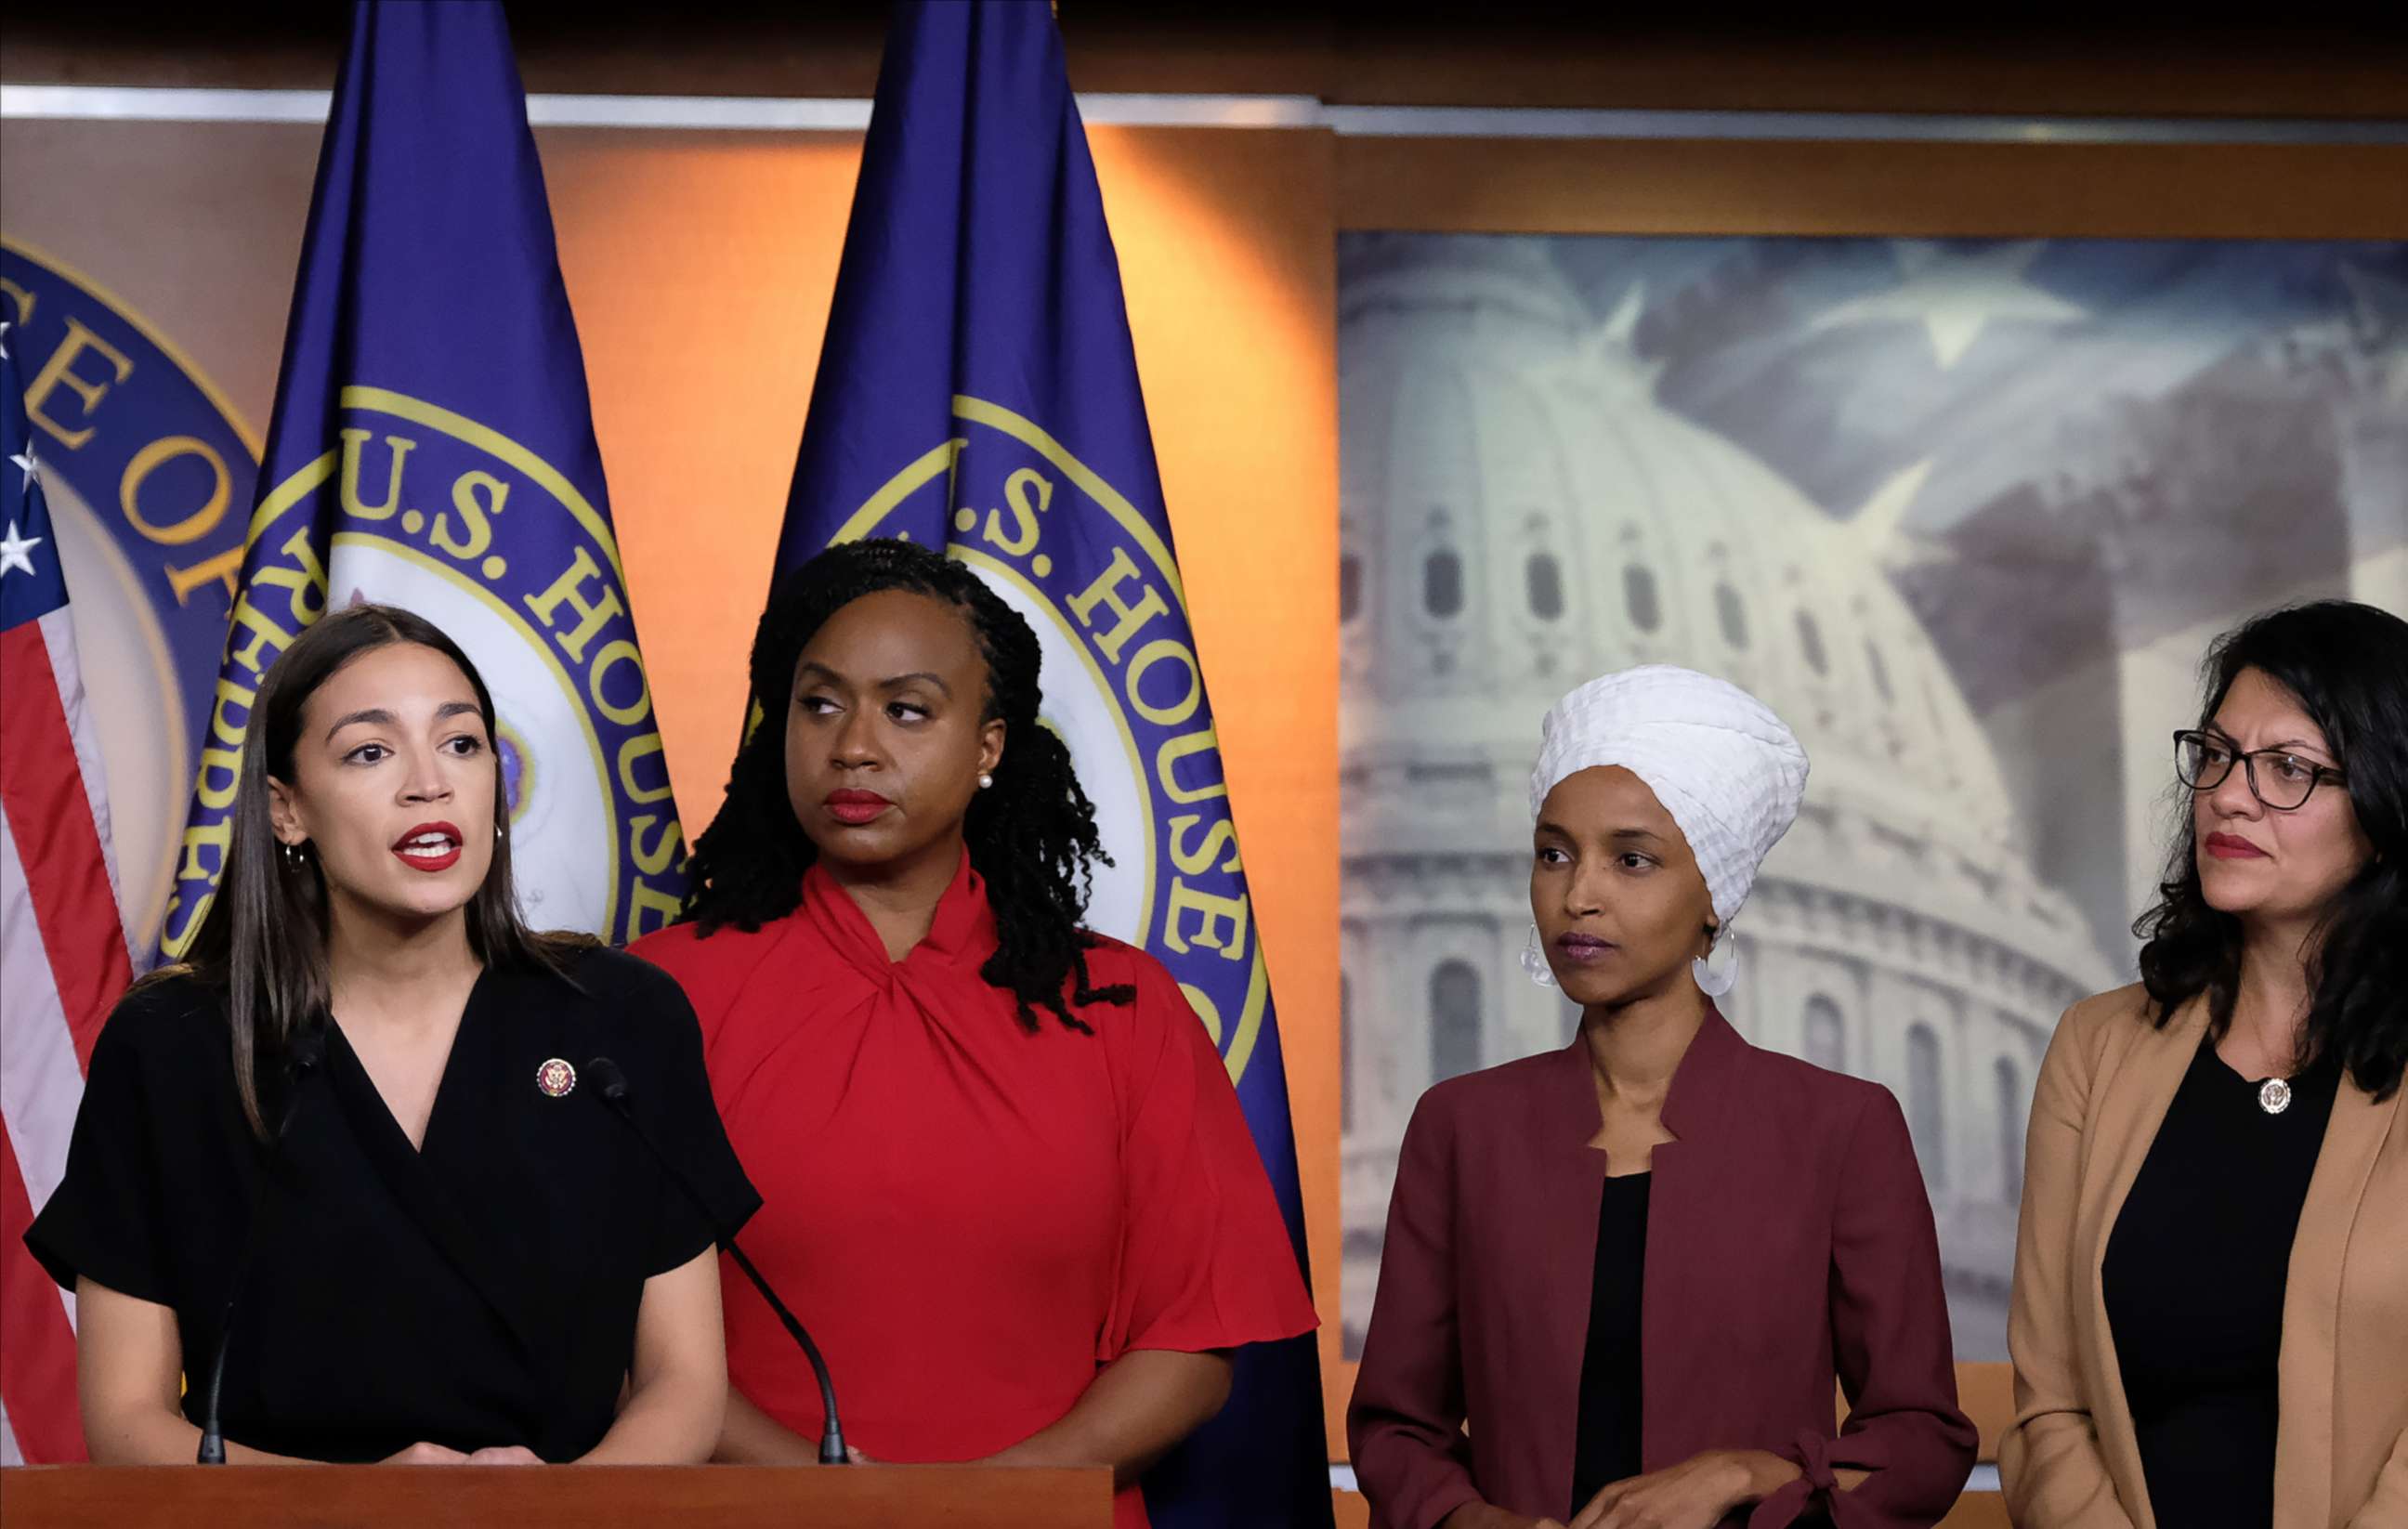 PHOTO: Rep. Alexandria Ocasio-Cortez speaks as Reps. Ayanna Pressley, Ilhan Omar, and Rashida Tlaib listen during a press conference at the U.S. Capitol, July 15, 2019 in Washington, D.C.